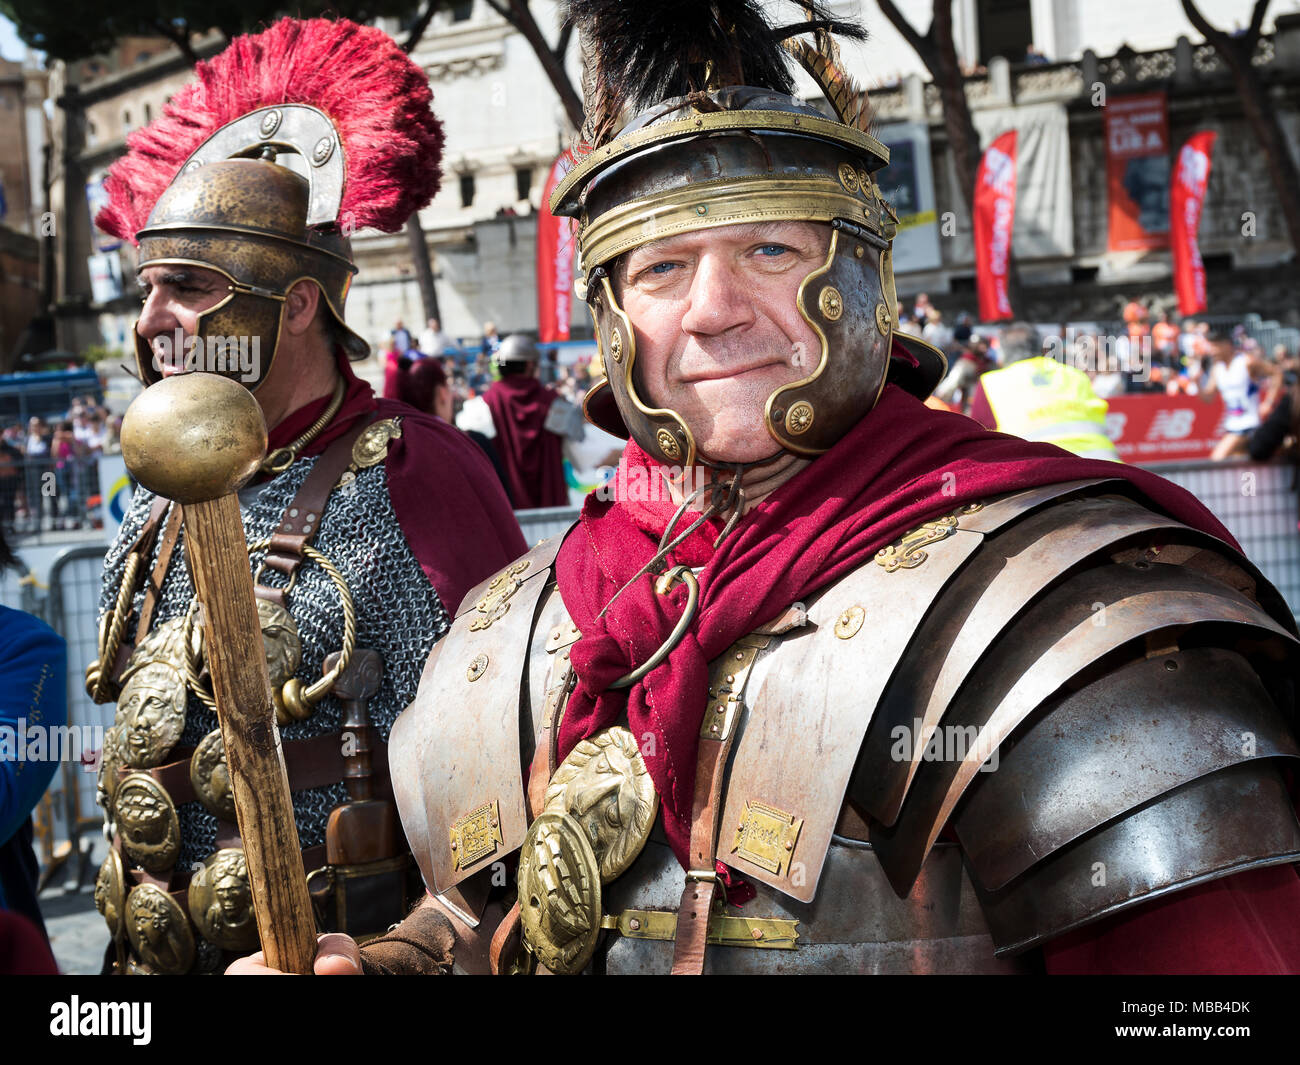 Rome, Italy - 8 April 2018: Gladiators in historical dress and armor at the start of the 24th edition of the Rome Marathon and Run for Fun. Credit: Polifoto/Alamy Live News Stock Photo